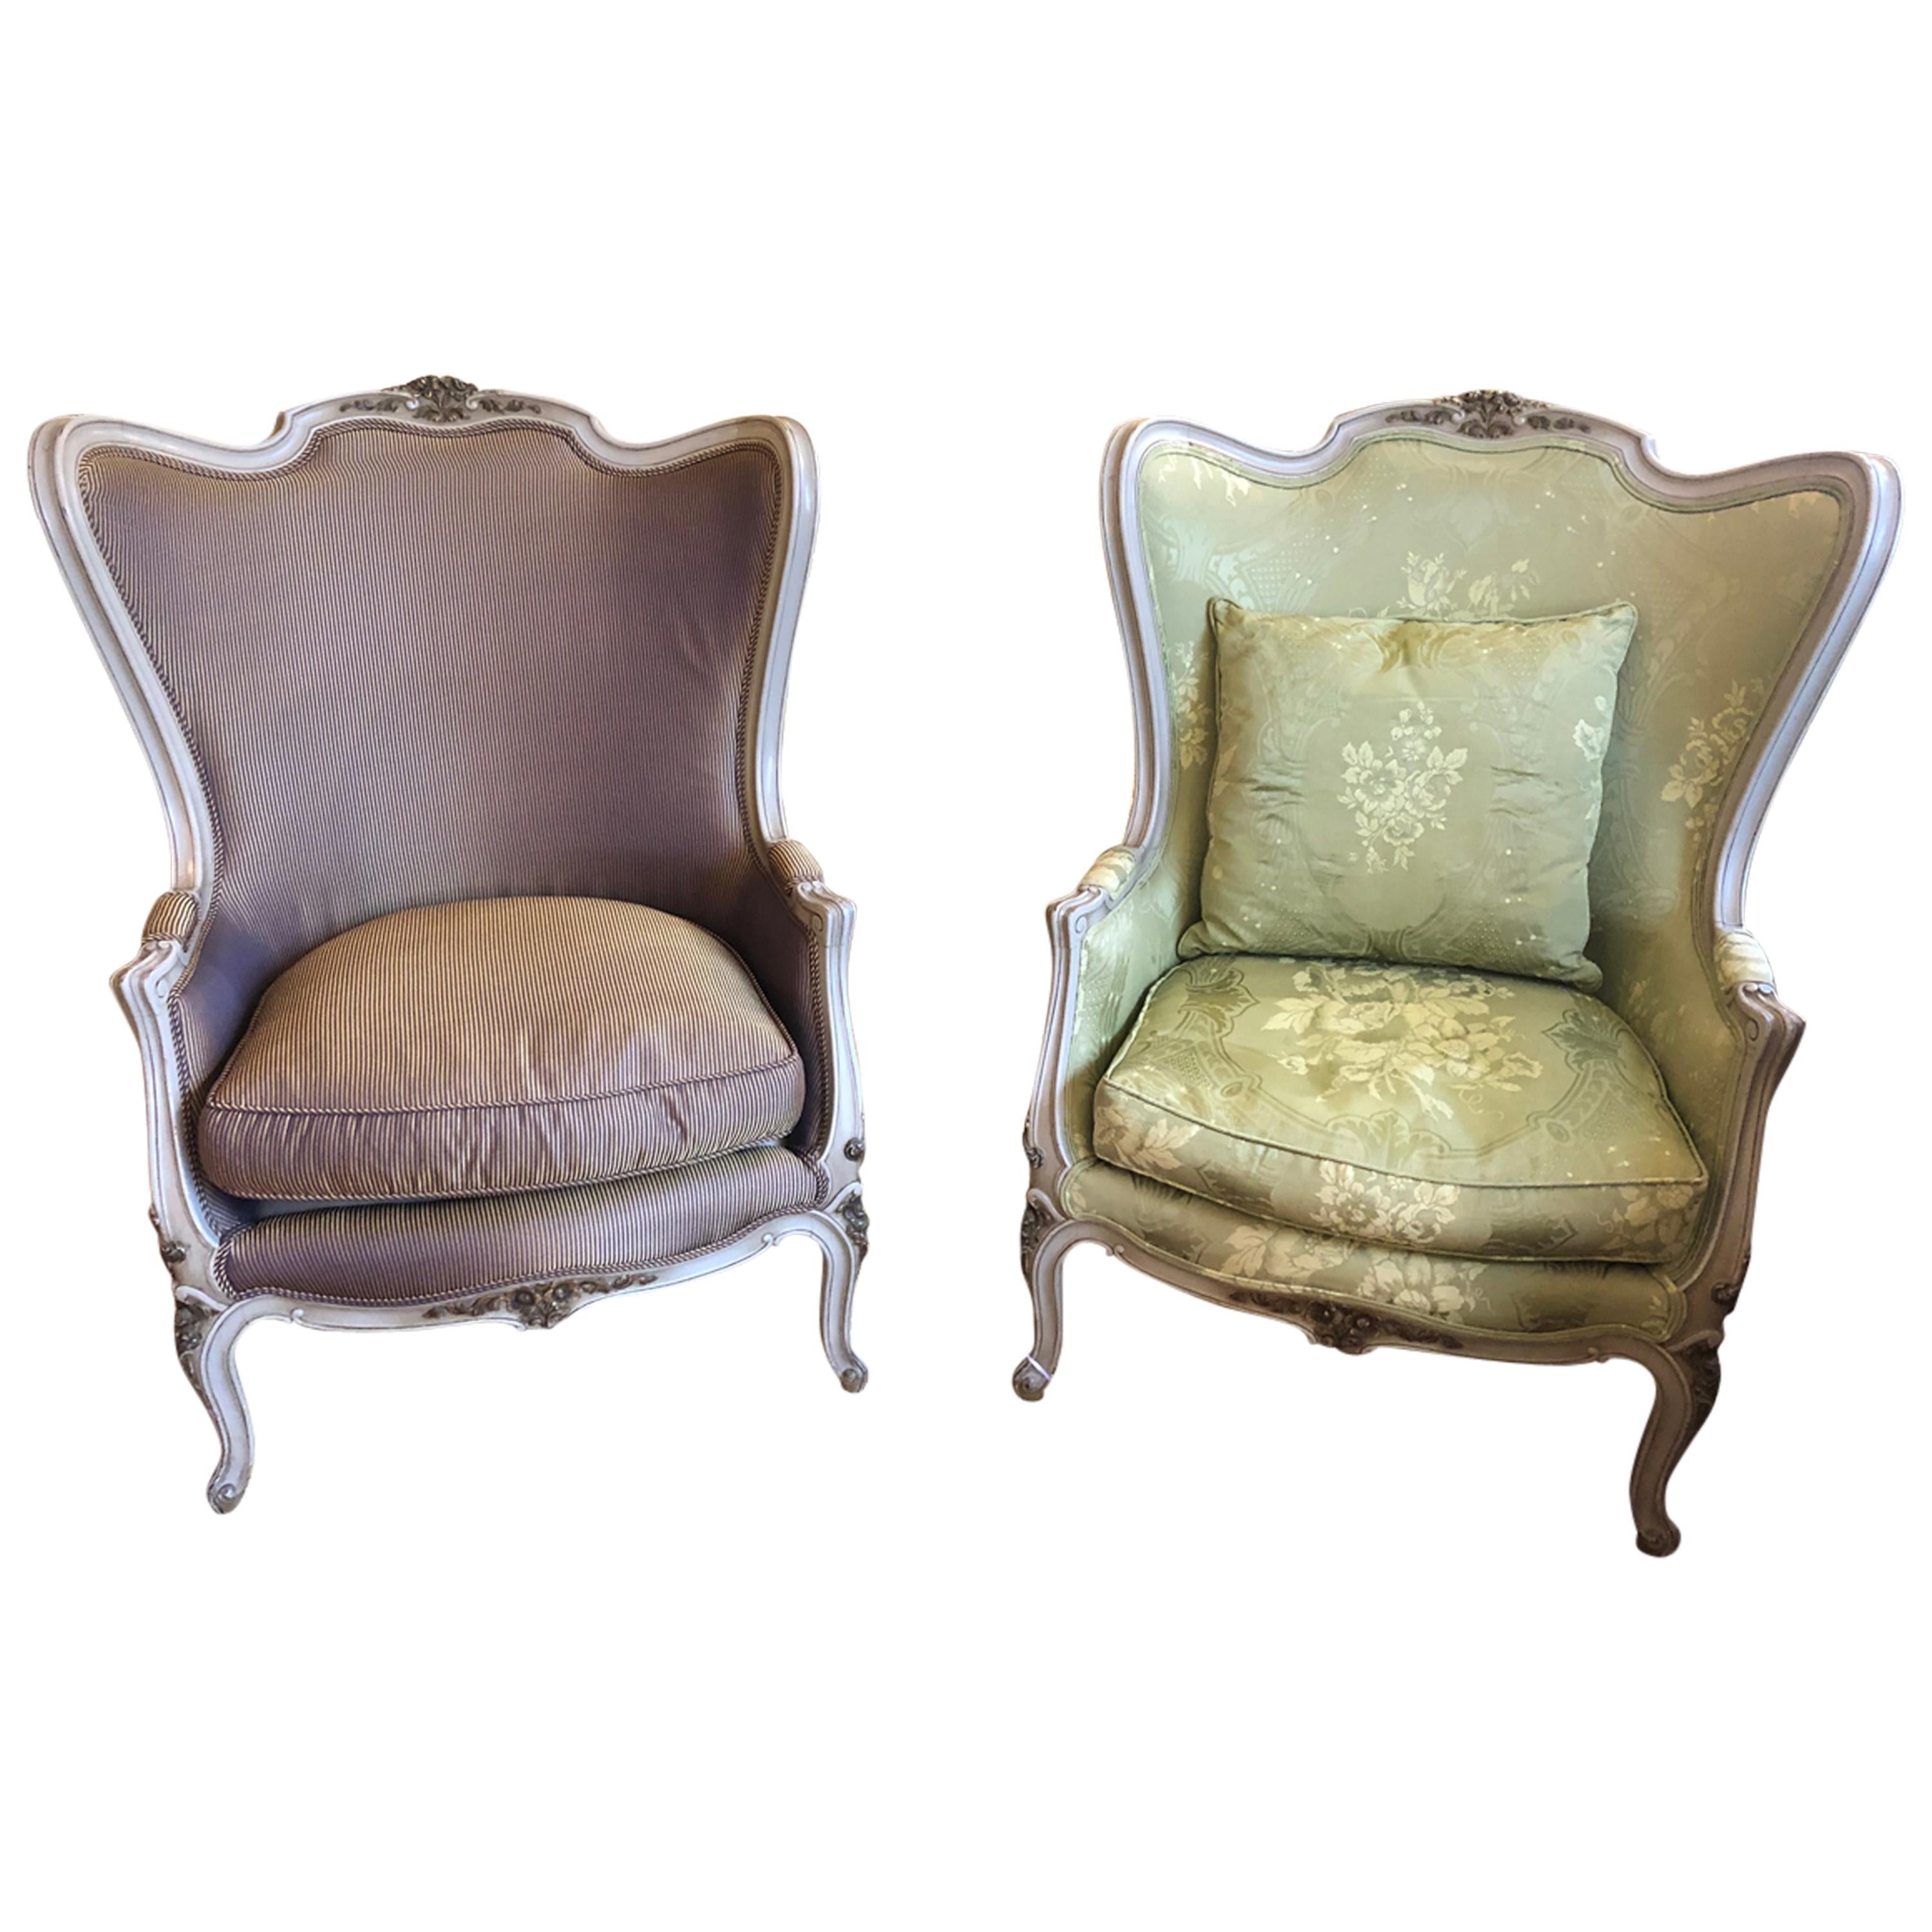 Stately Pair of French Louis XV Style Painted Gilded Beechwood Bergere Chairs